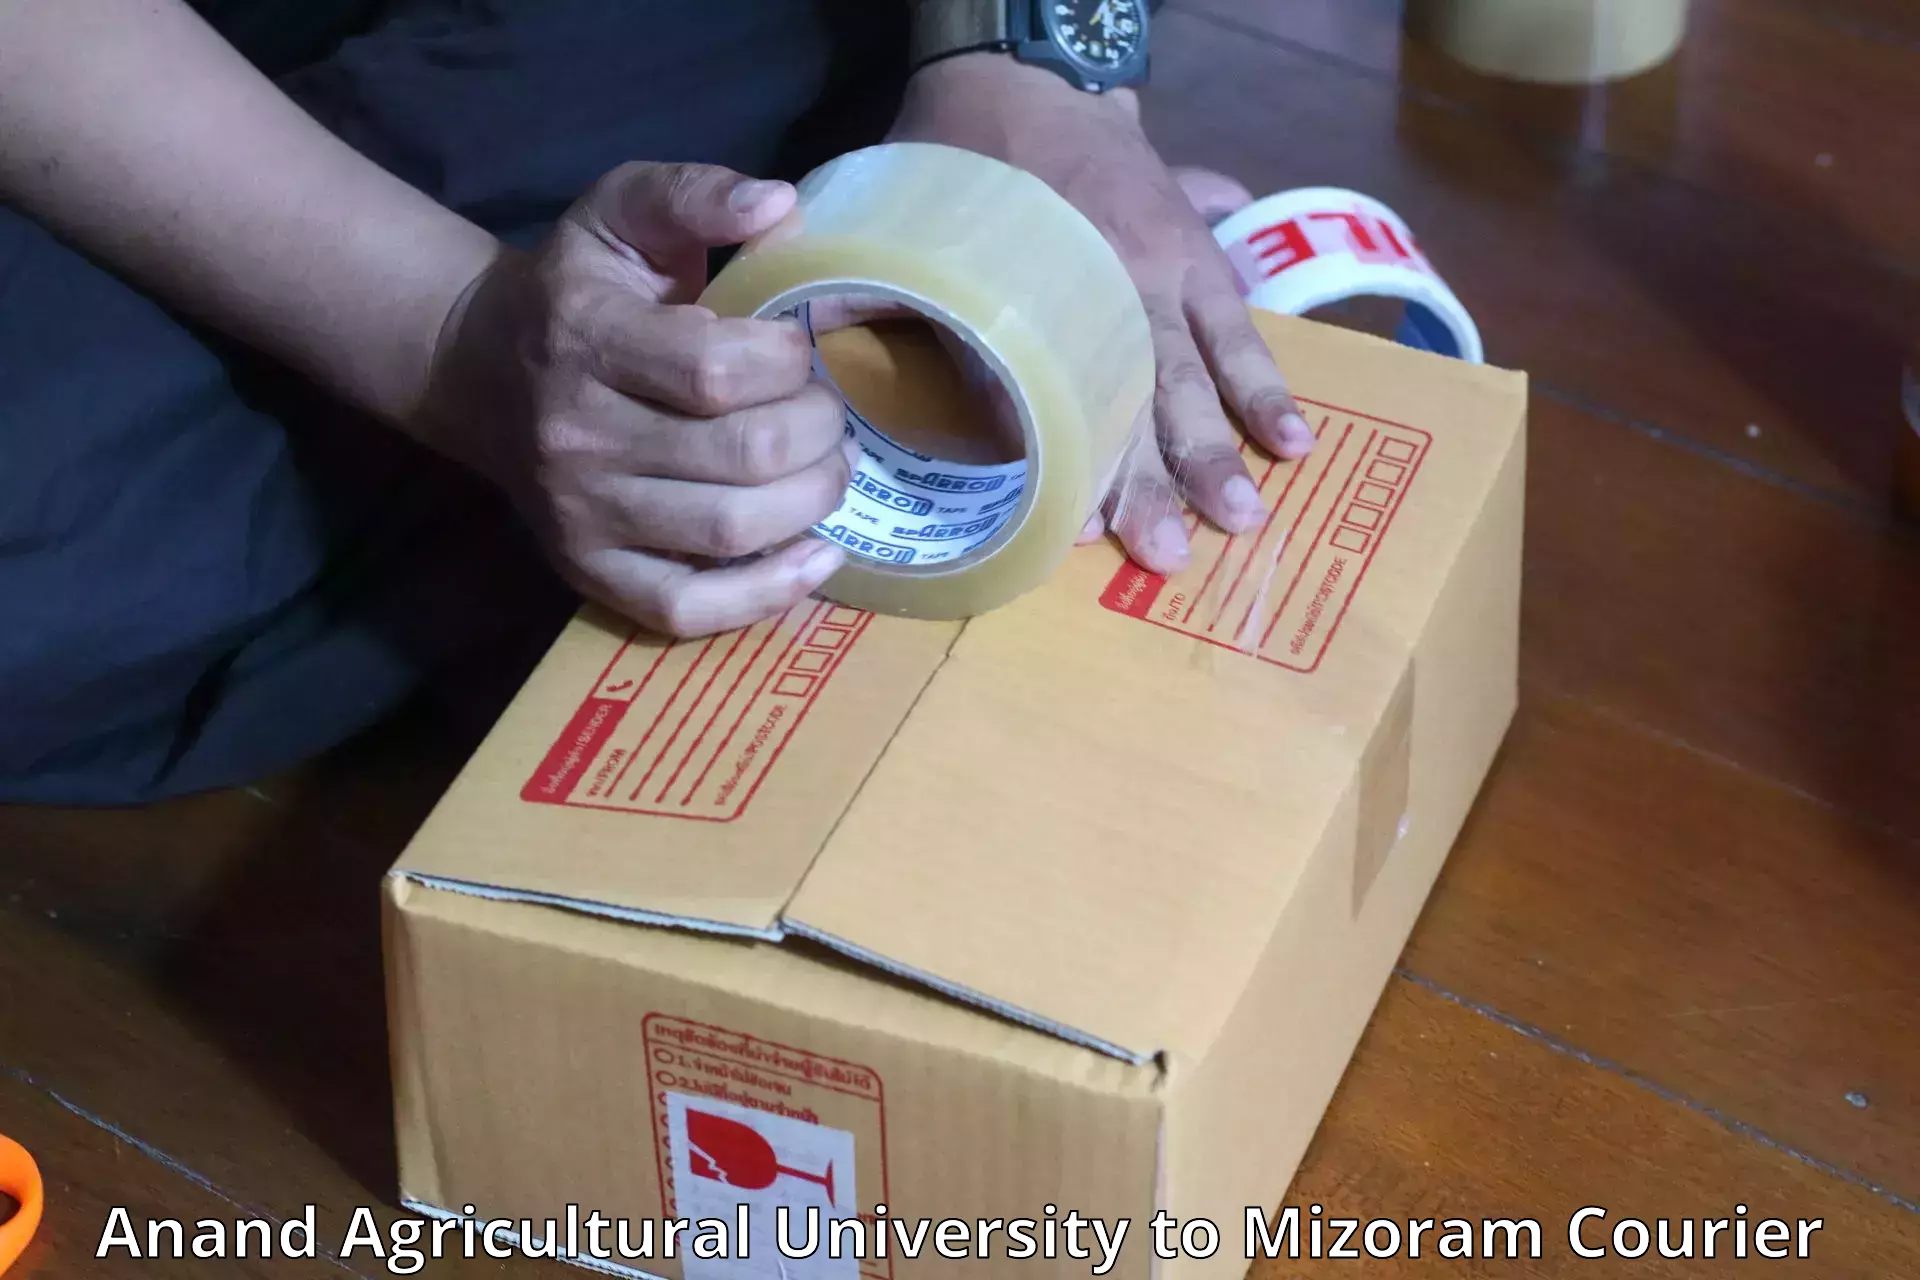 Baggage shipping logistics in Anand Agricultural University to Mizoram